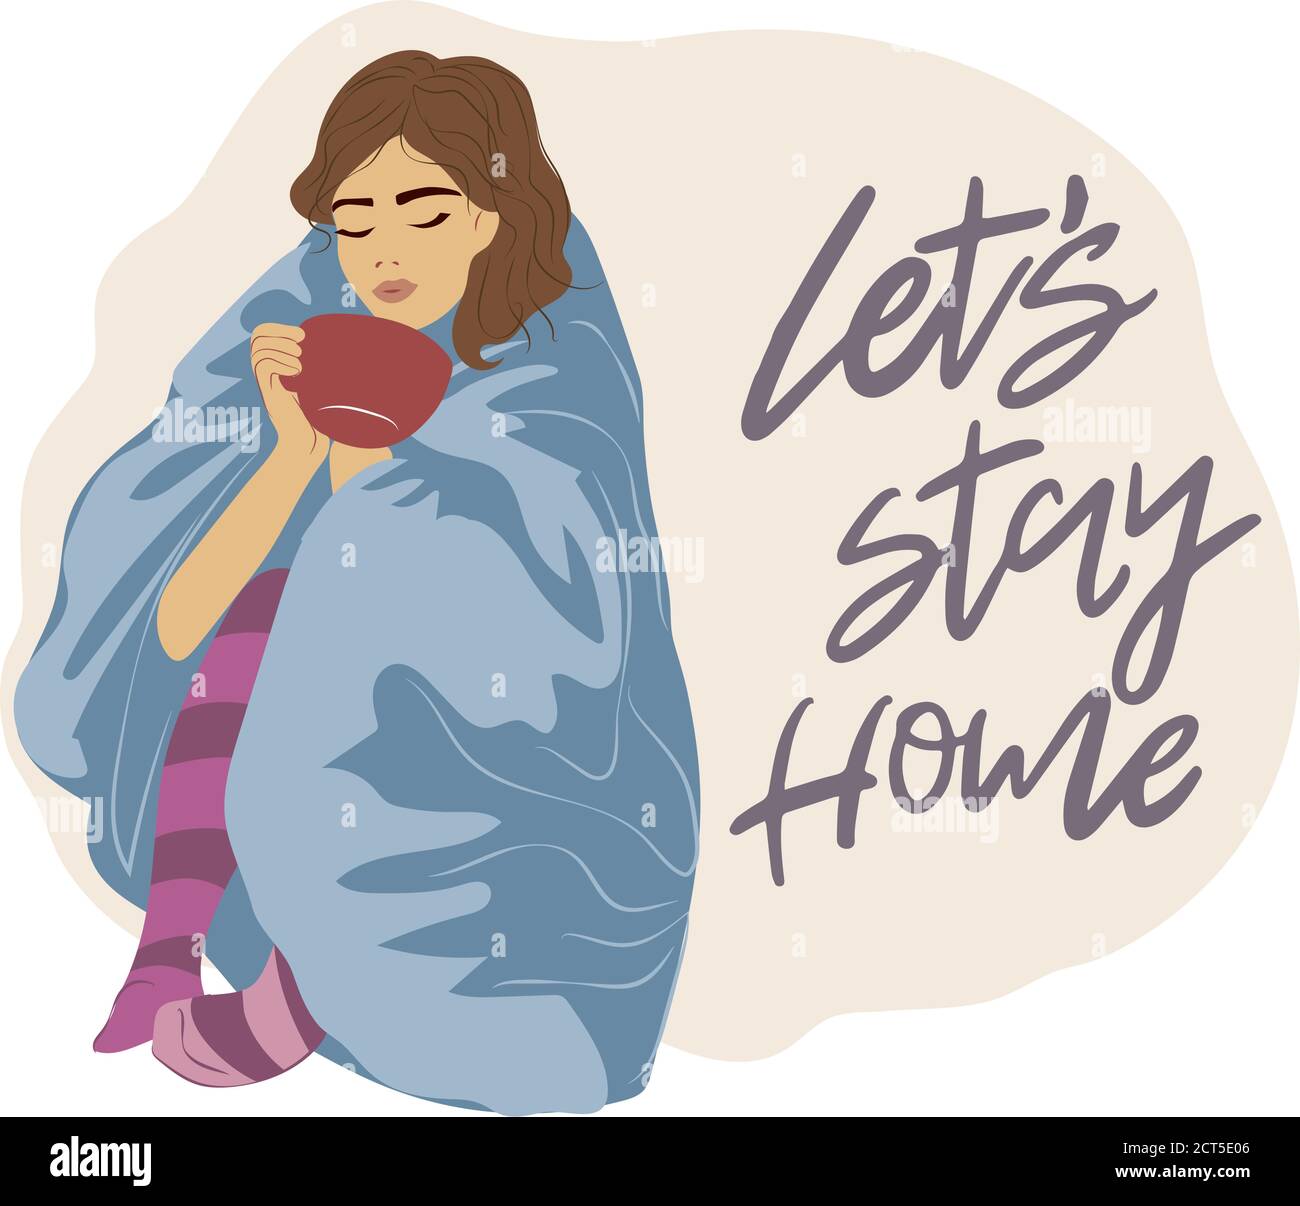 Corona virus (covid 19) campaign to stay at home. lifestyle activity that you can do at home to stay healthy. Flat design vector Stock Vector